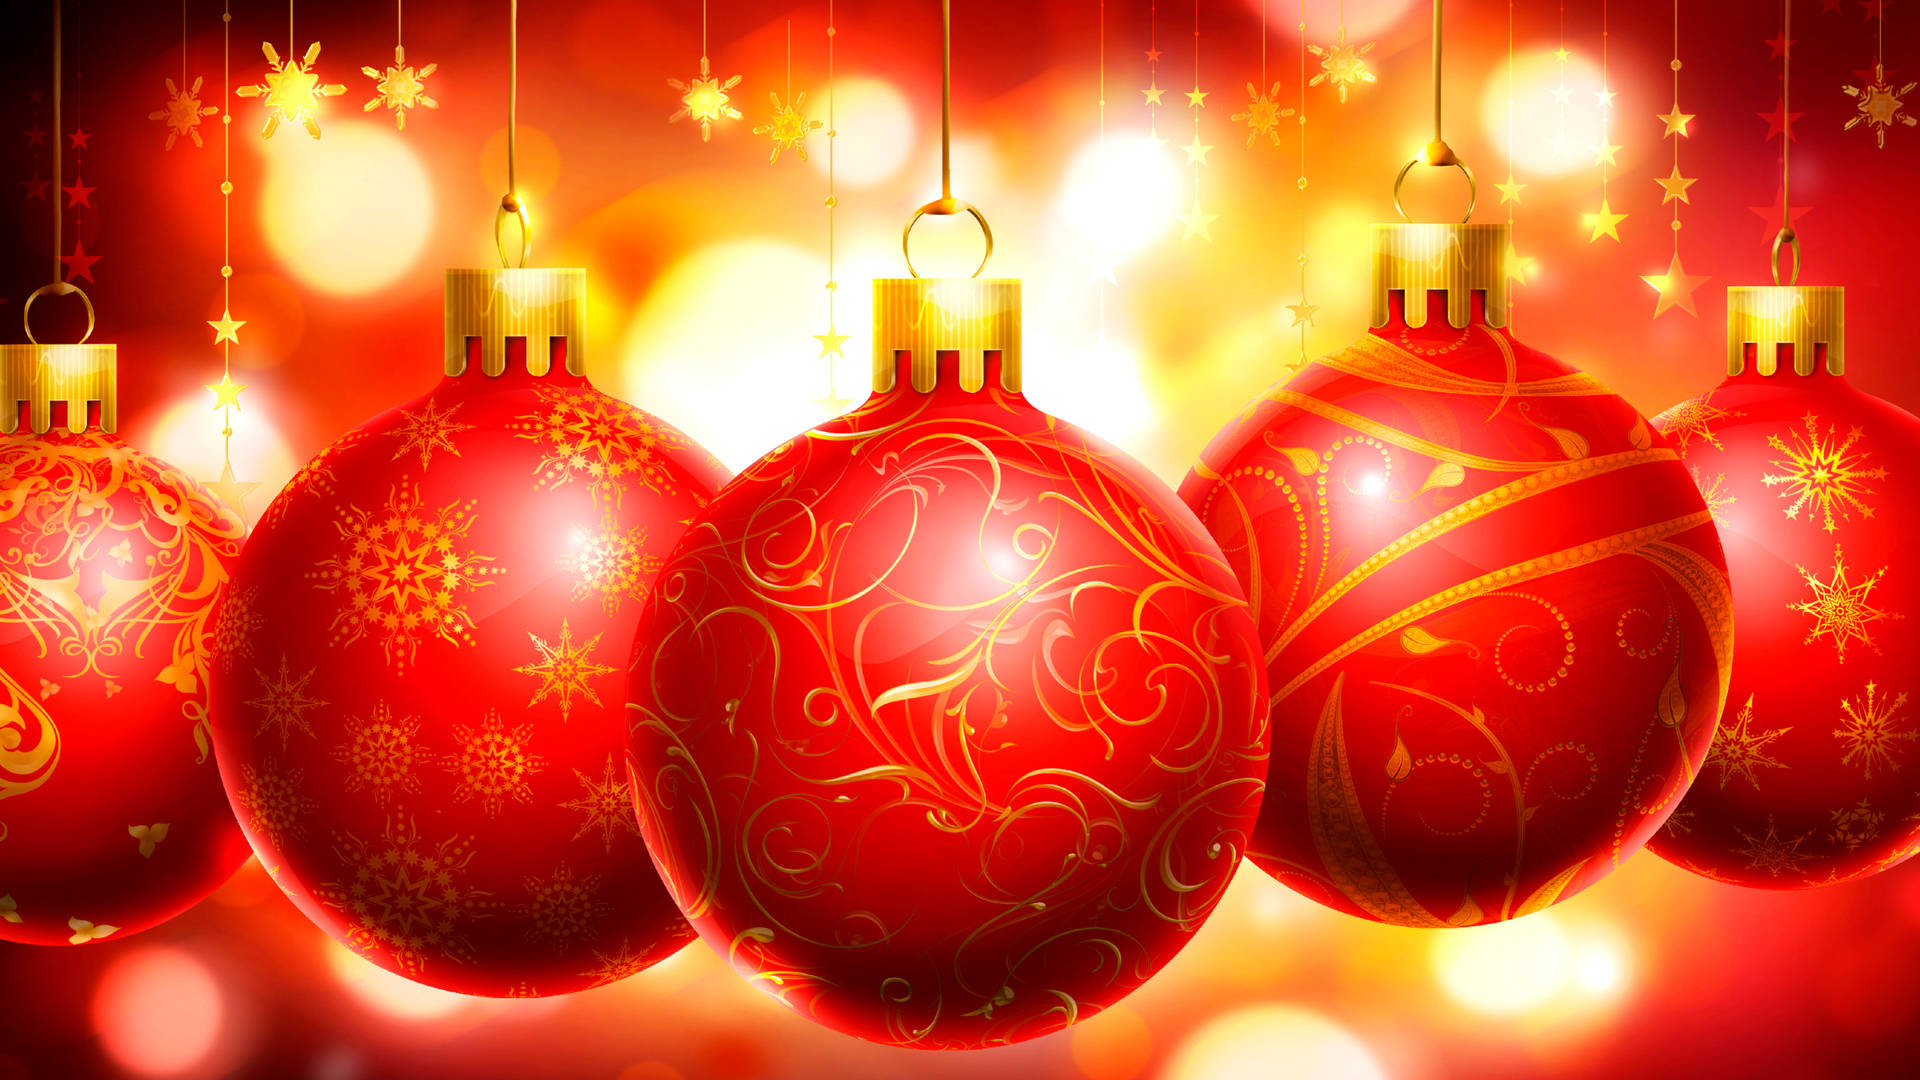 Red Christmas Ornaments Vector Wallpaper